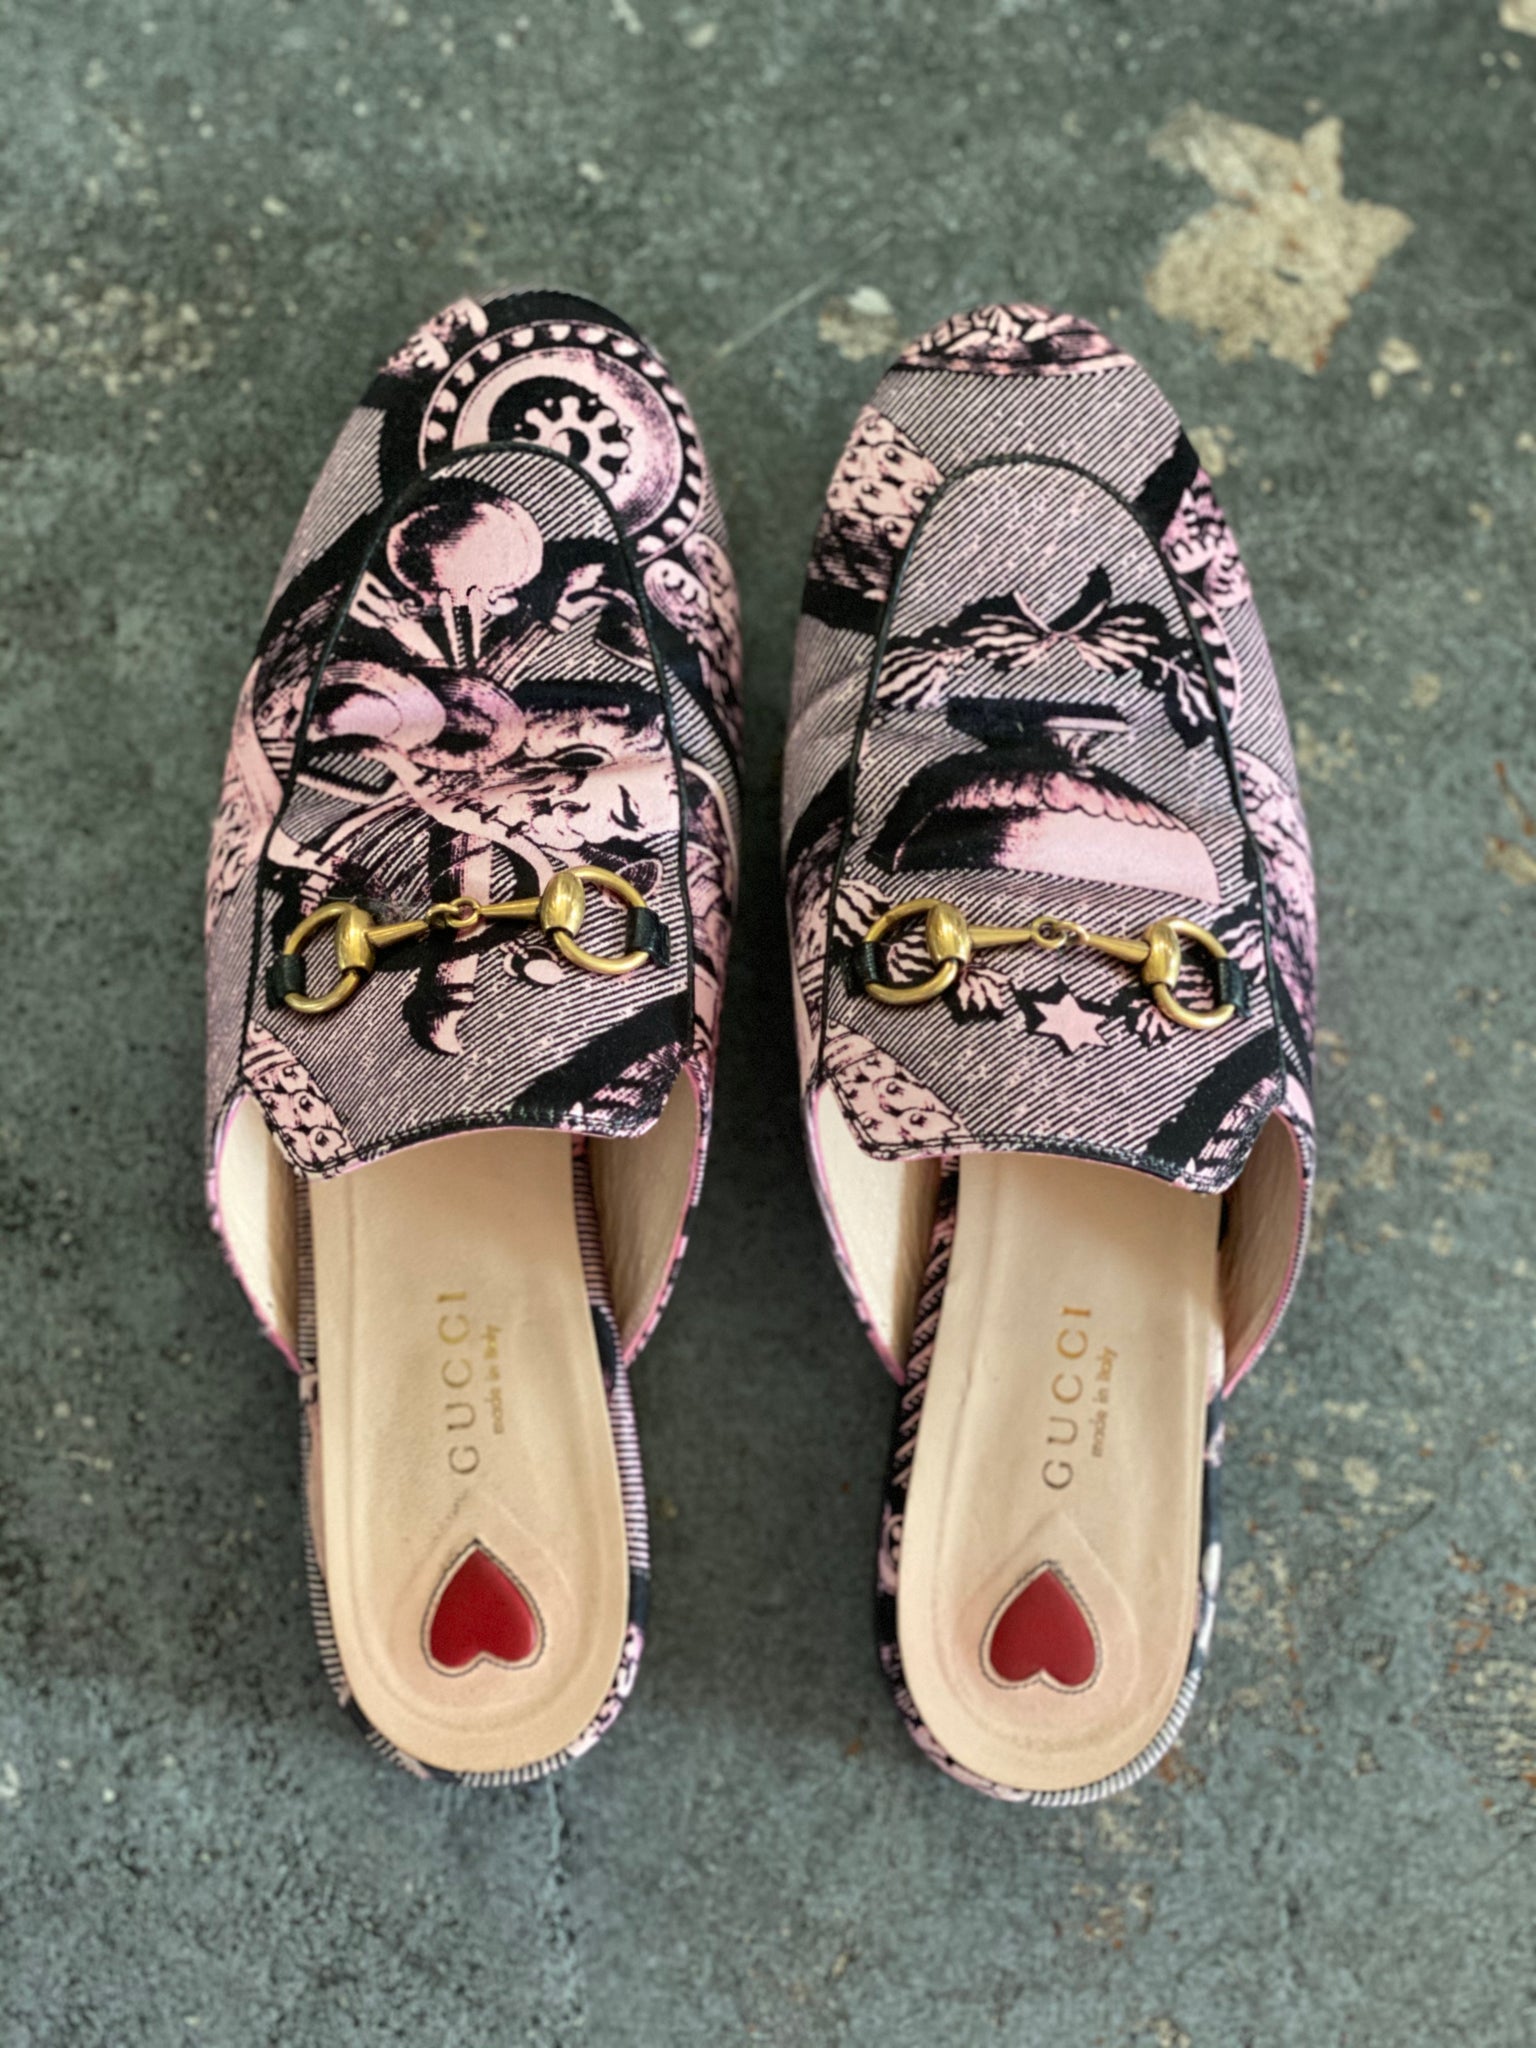 Gucci Princetown Pink Slides 37 – The Curatorial Dept.